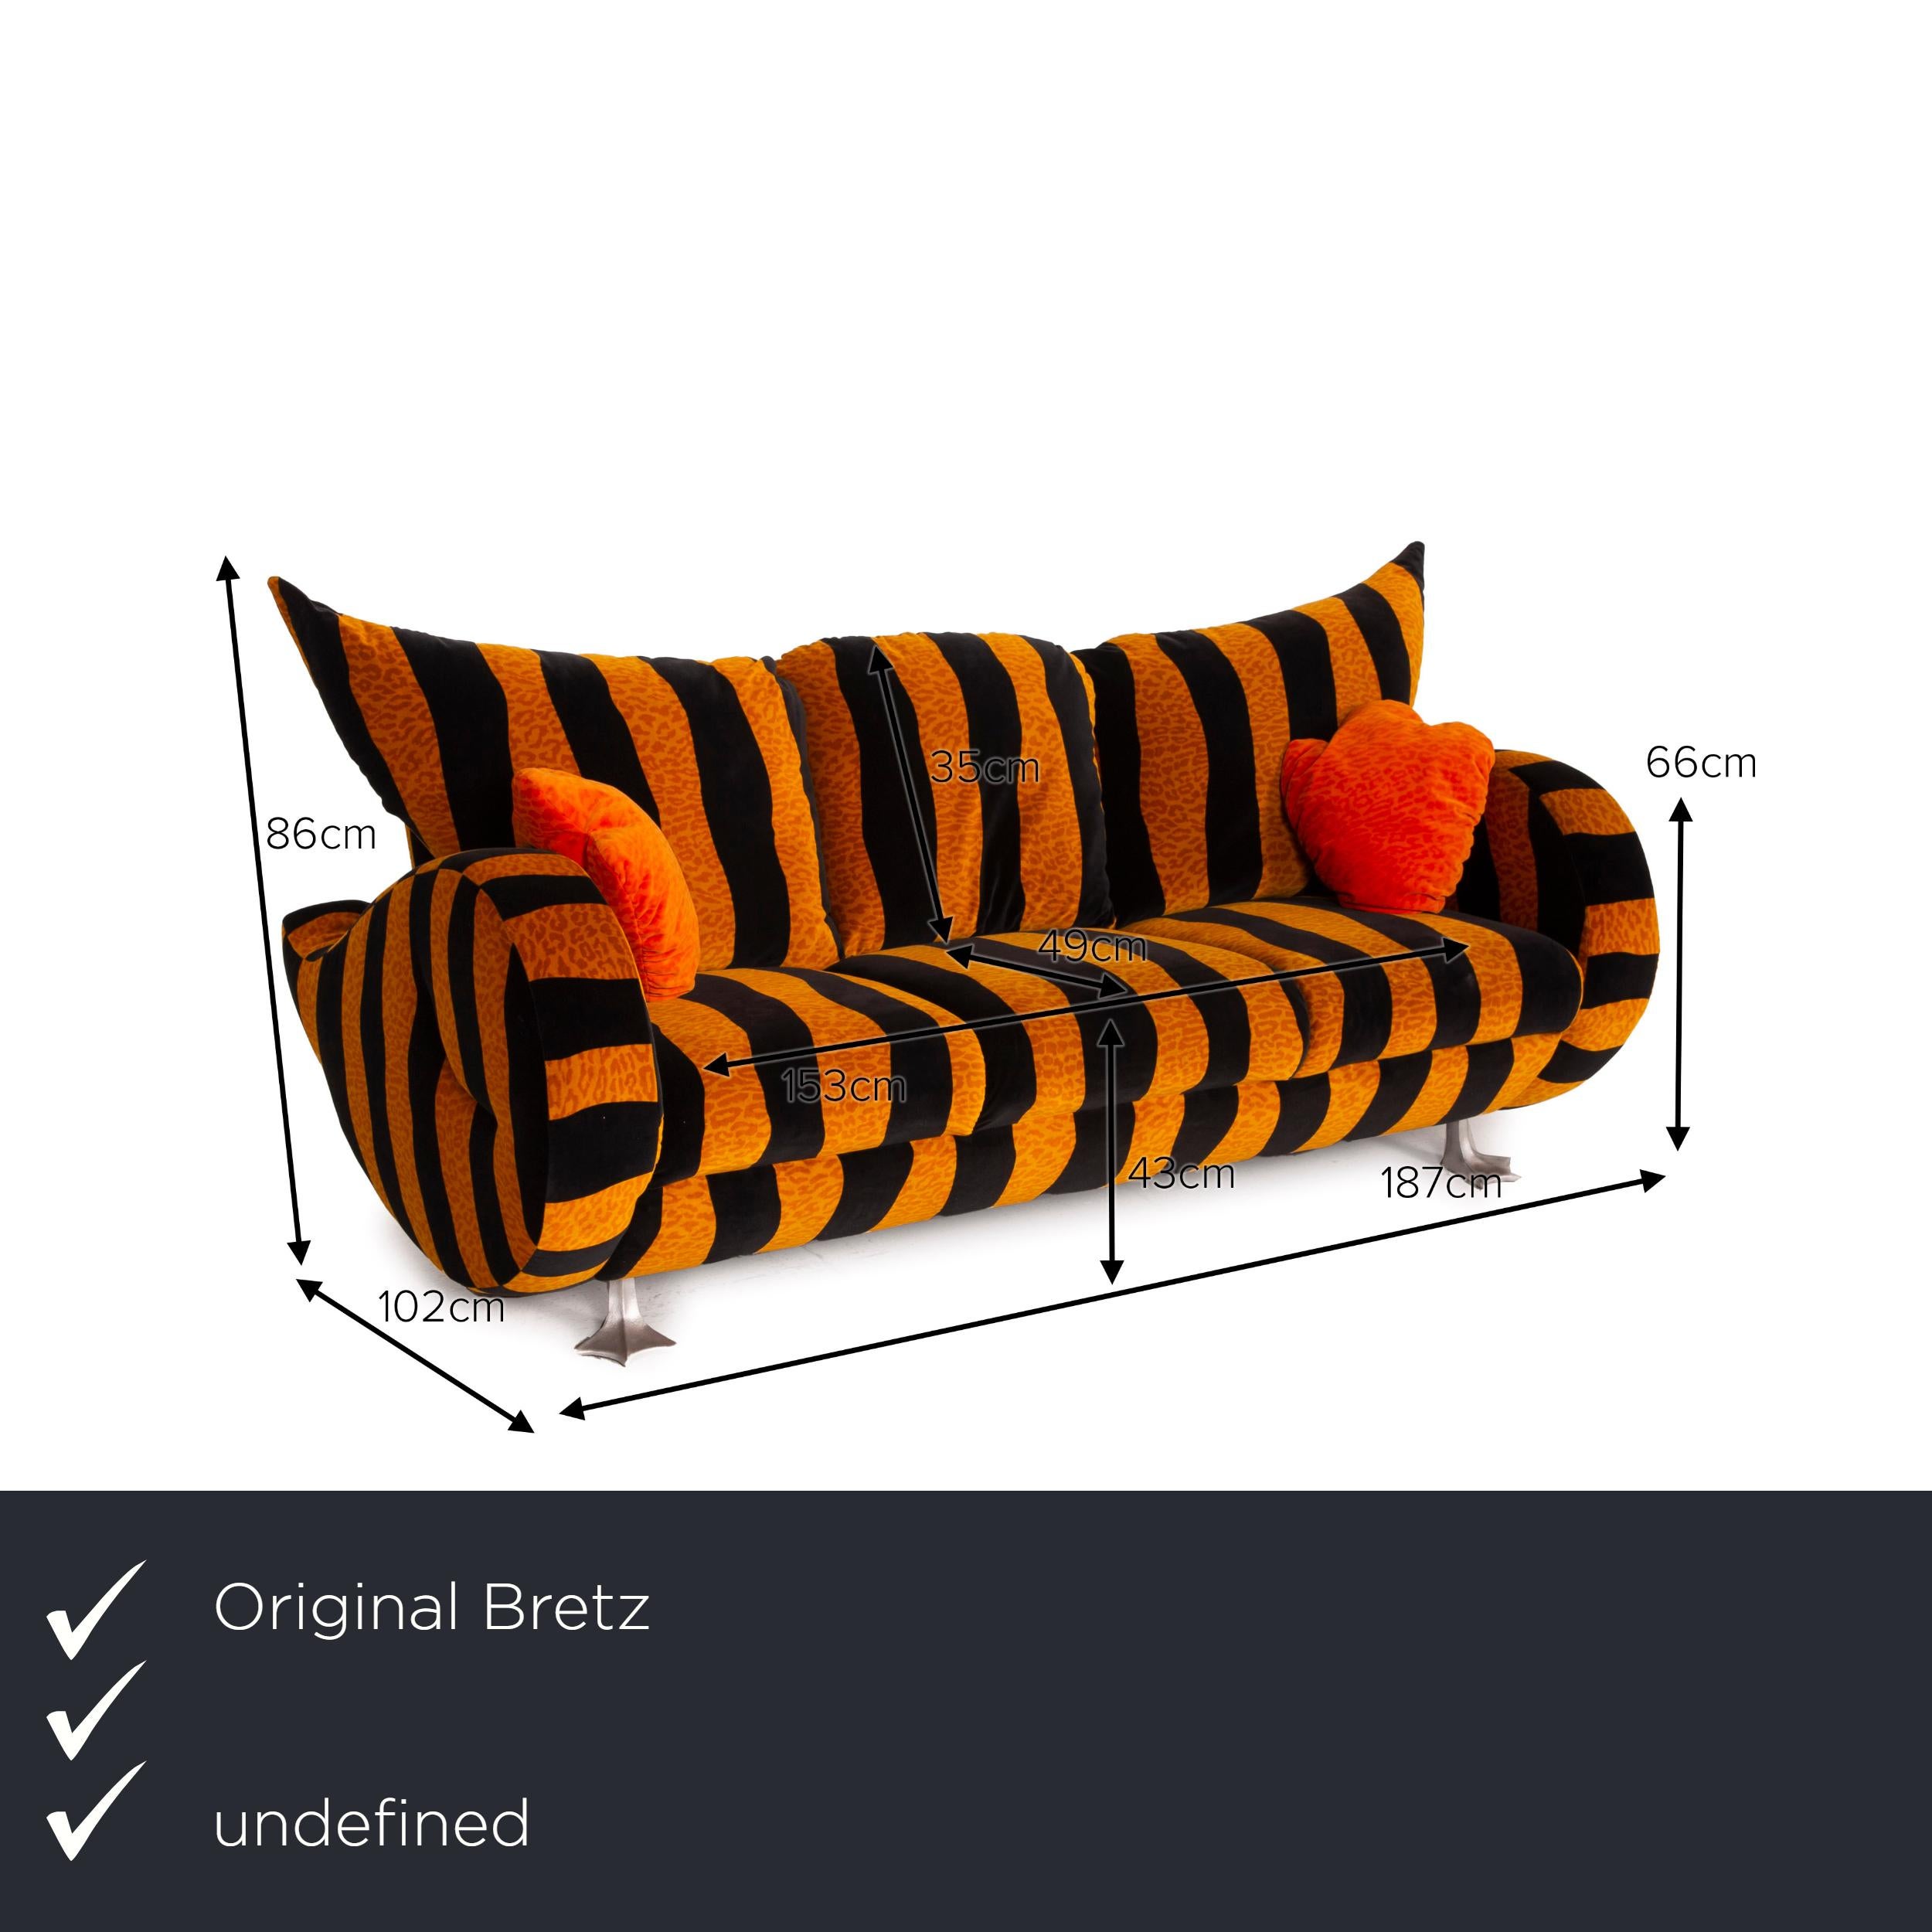 We present to you a Bretz prison duck fabric sofa set yellow three seater black tiger pattern.
  
 

 Product measurements in centimeters:
 

 depth: 187
 width: 187
 height: 86
 seat height: 43
 rest height: 66
 seat depth: 49
 seat